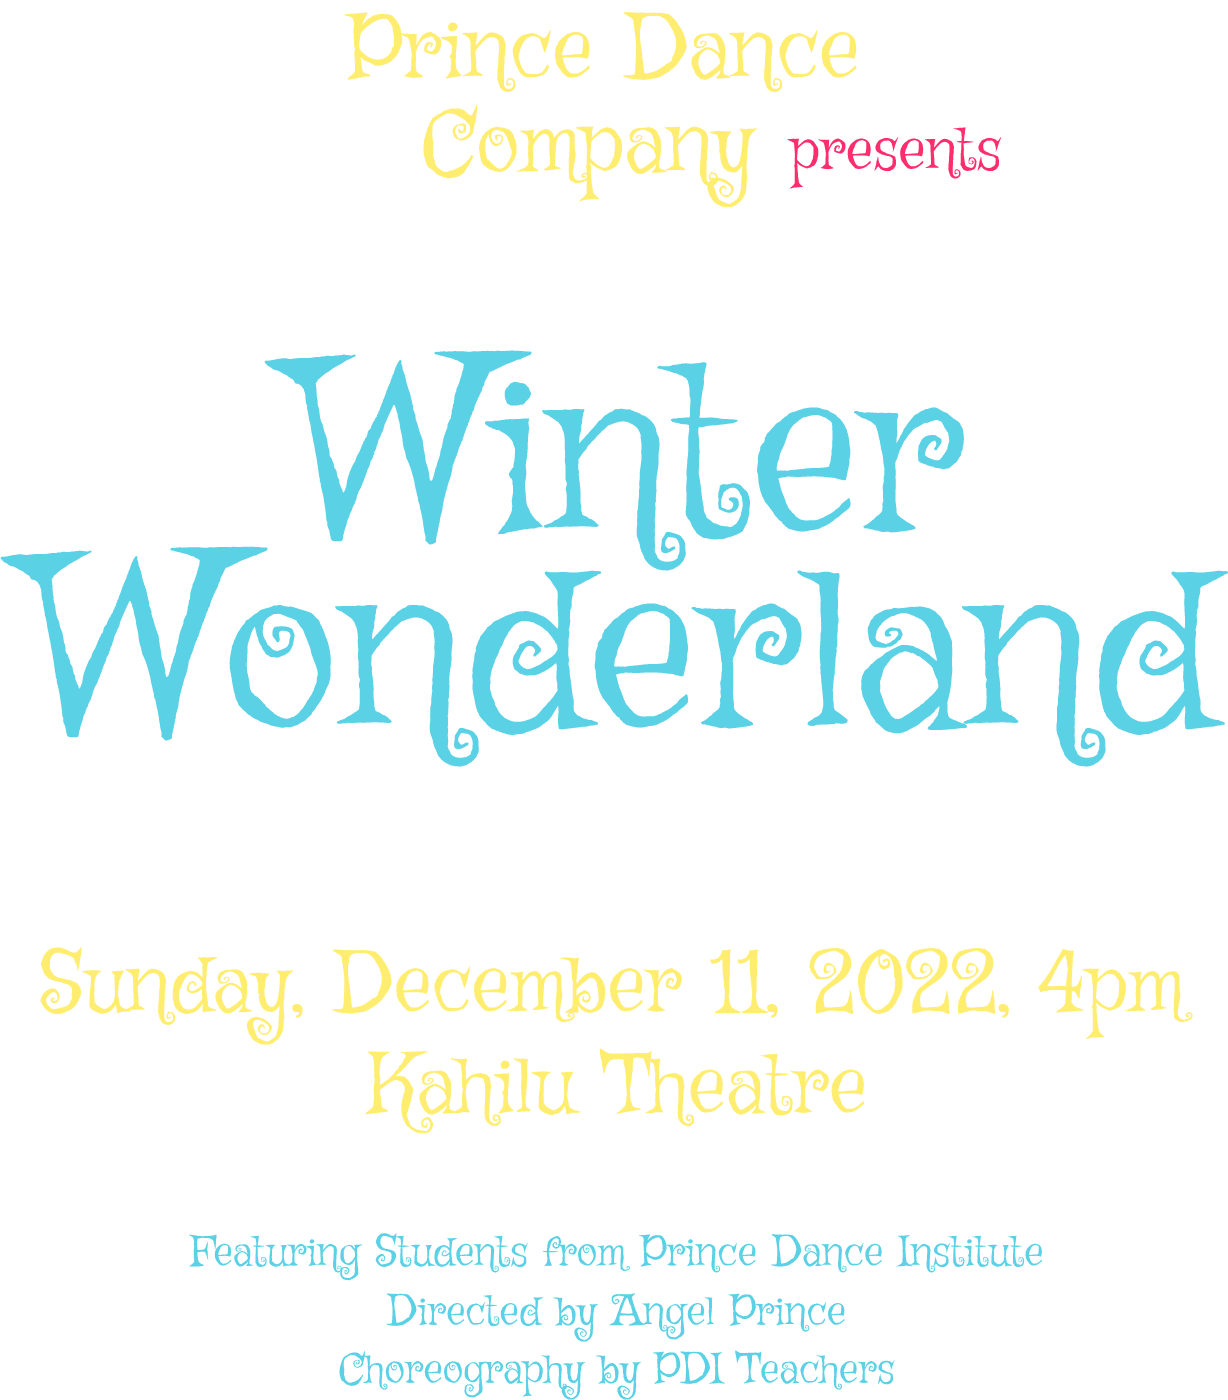 Prince Dance Company presents Winter Wonderland at Kahilu Theatre on Sunday, December 11, 2022 at 4pm